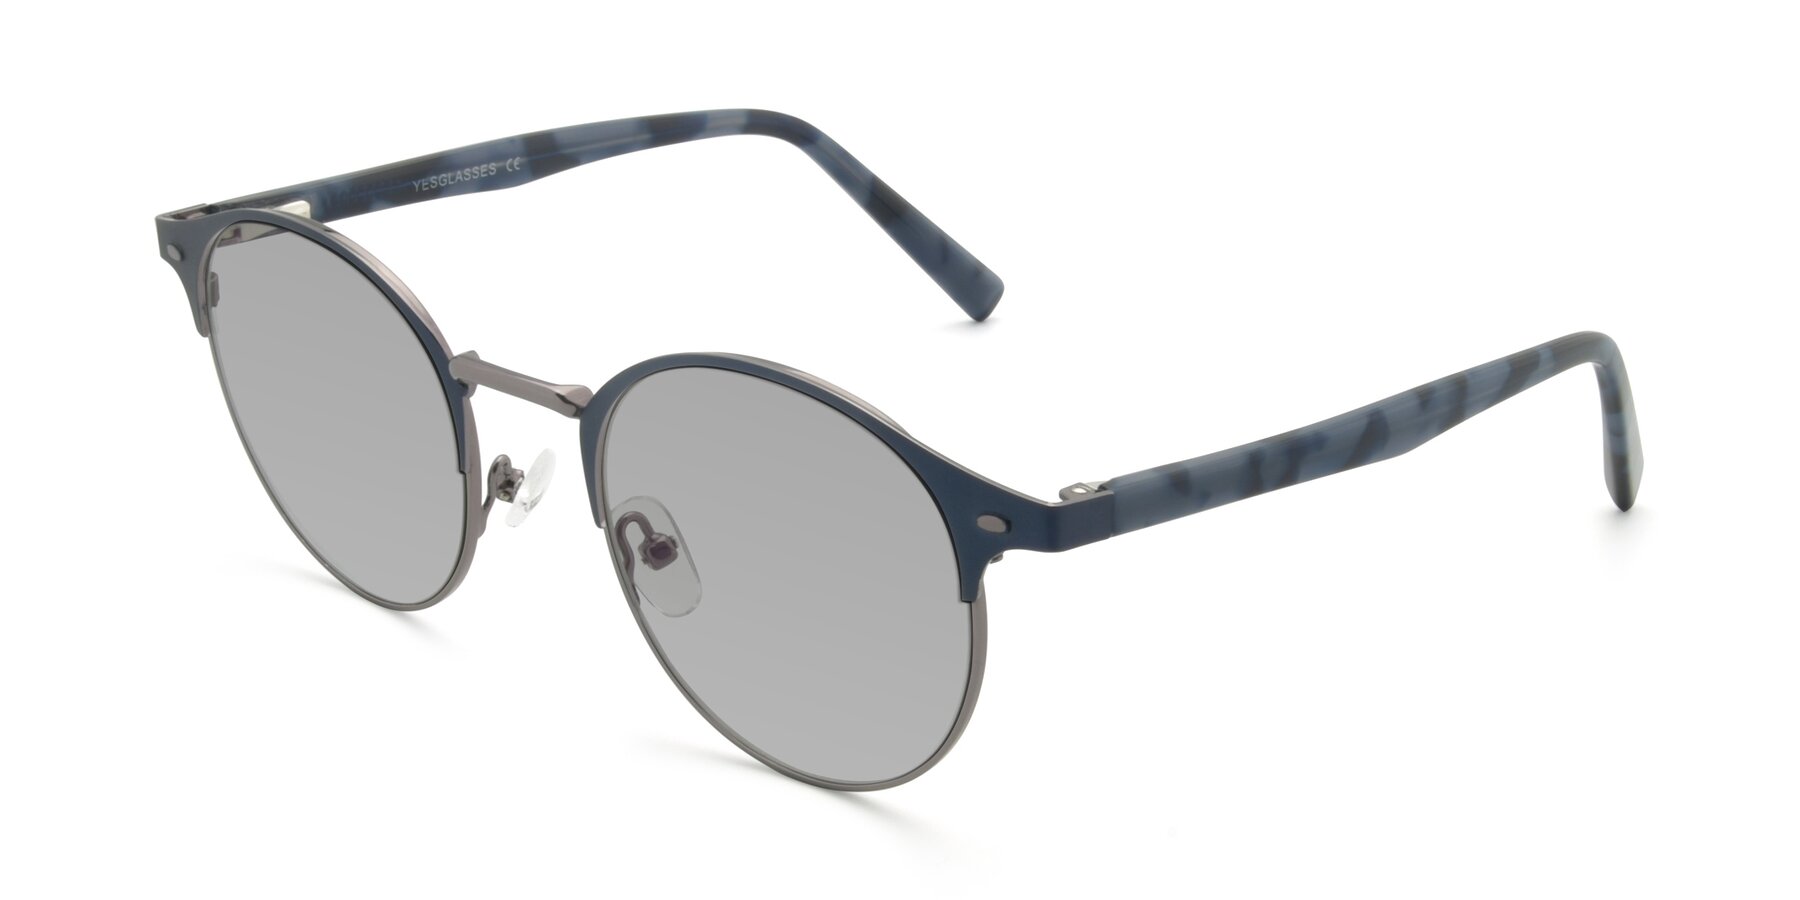 Angle of 9099 in Blue-Gunmetal with Light Gray Tinted Lenses